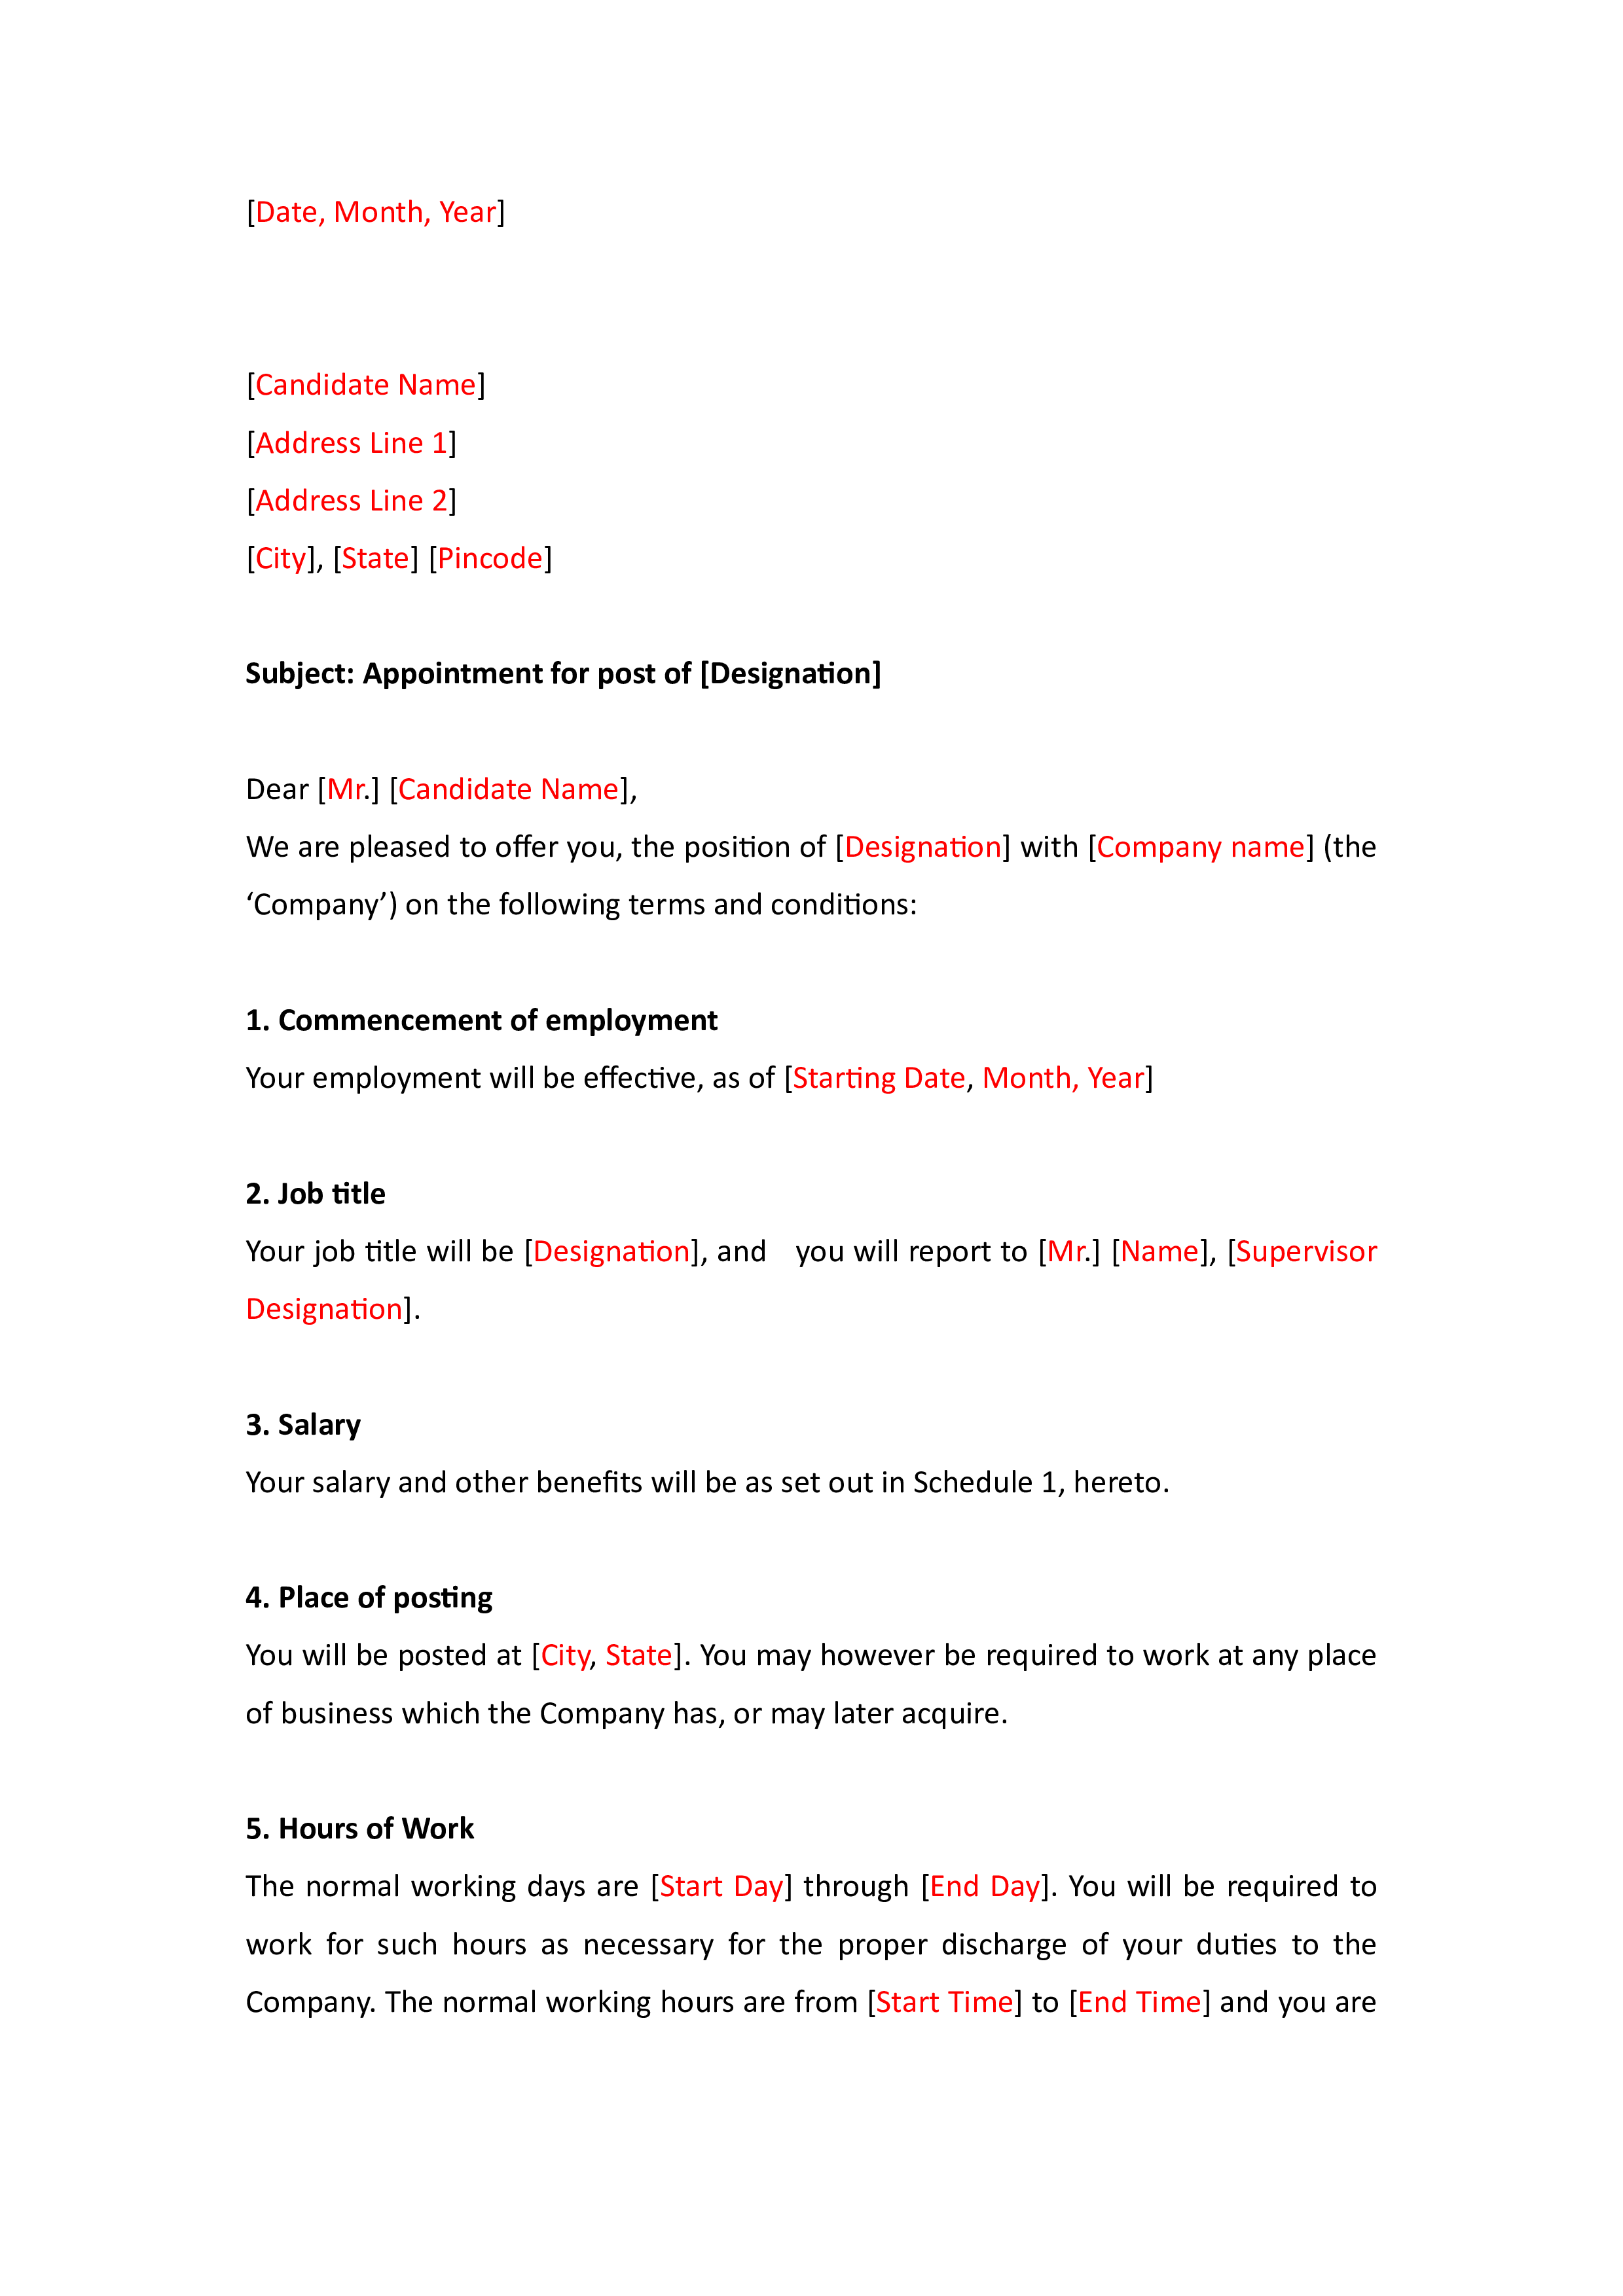 Trainee Appointment Letter Format main image